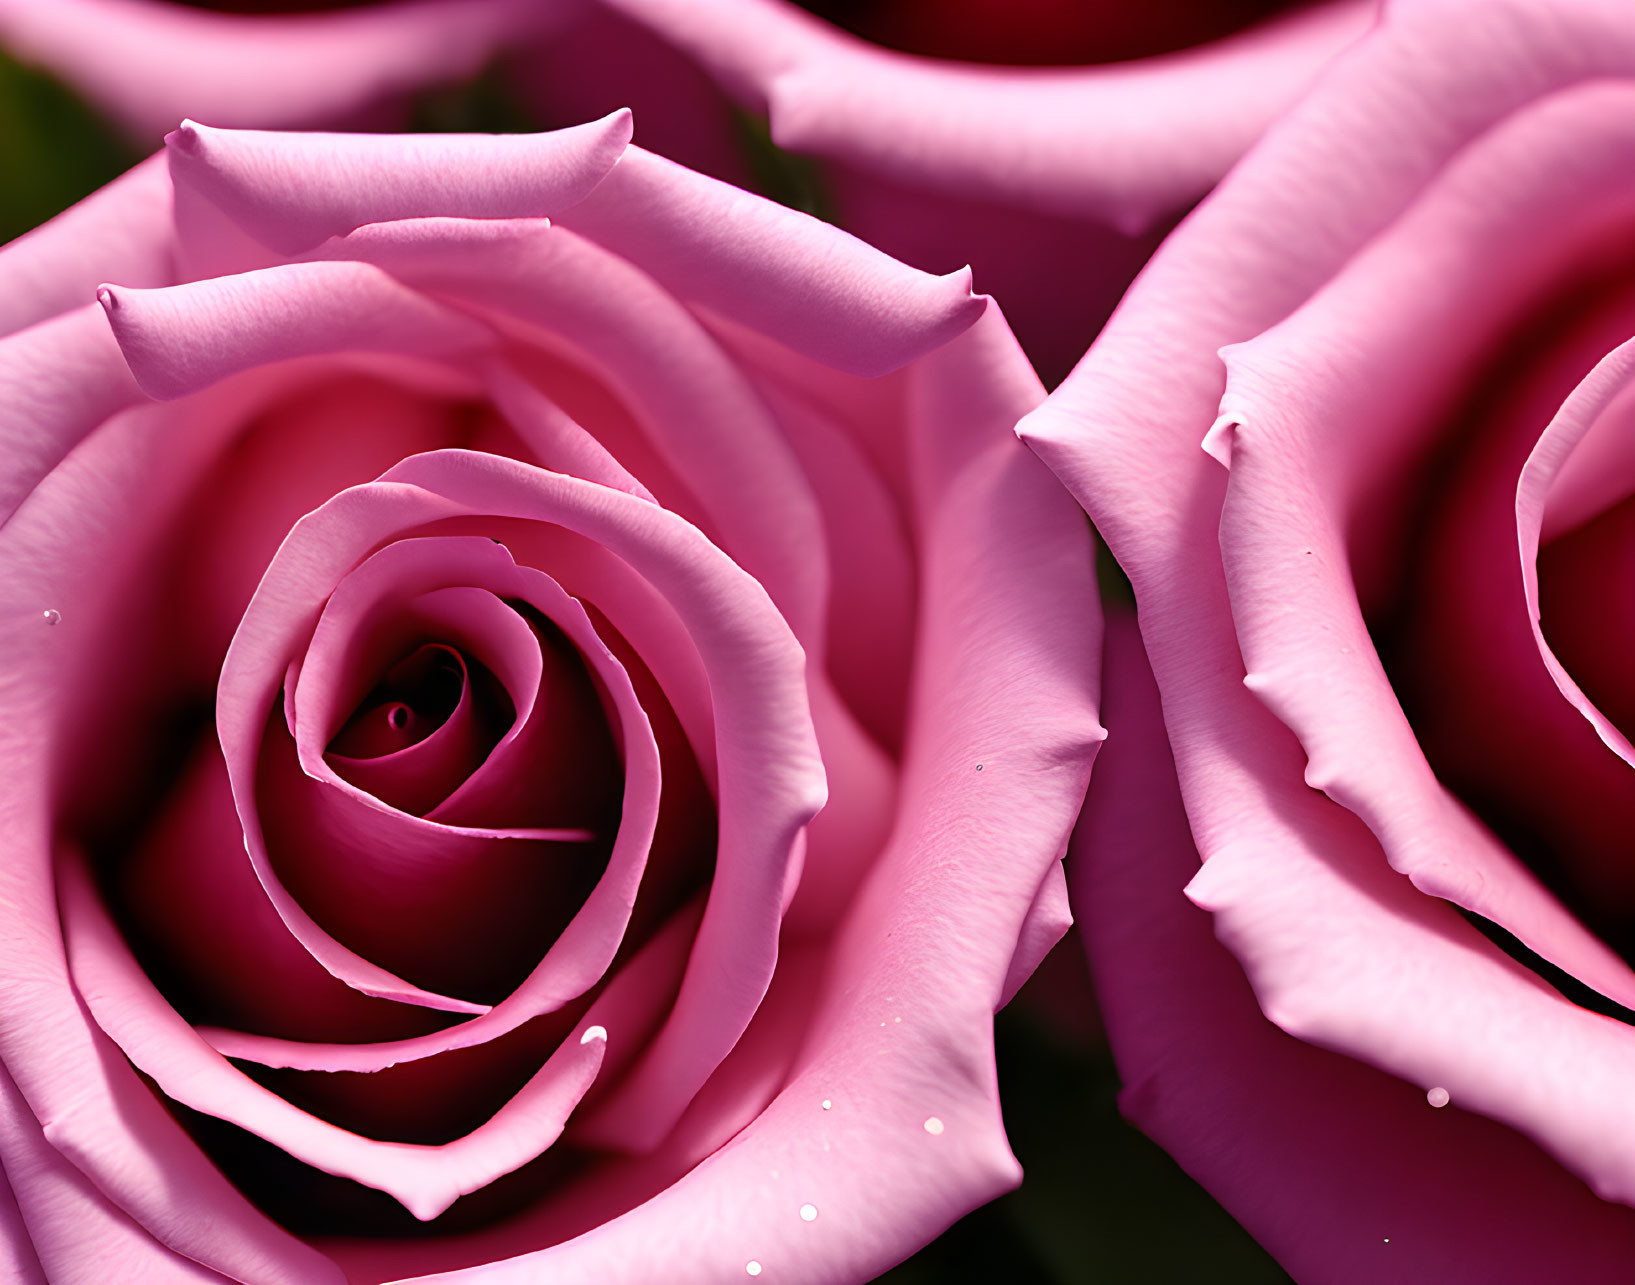 Vibrant pink roses with delicate petals and water droplets captured in close-up.